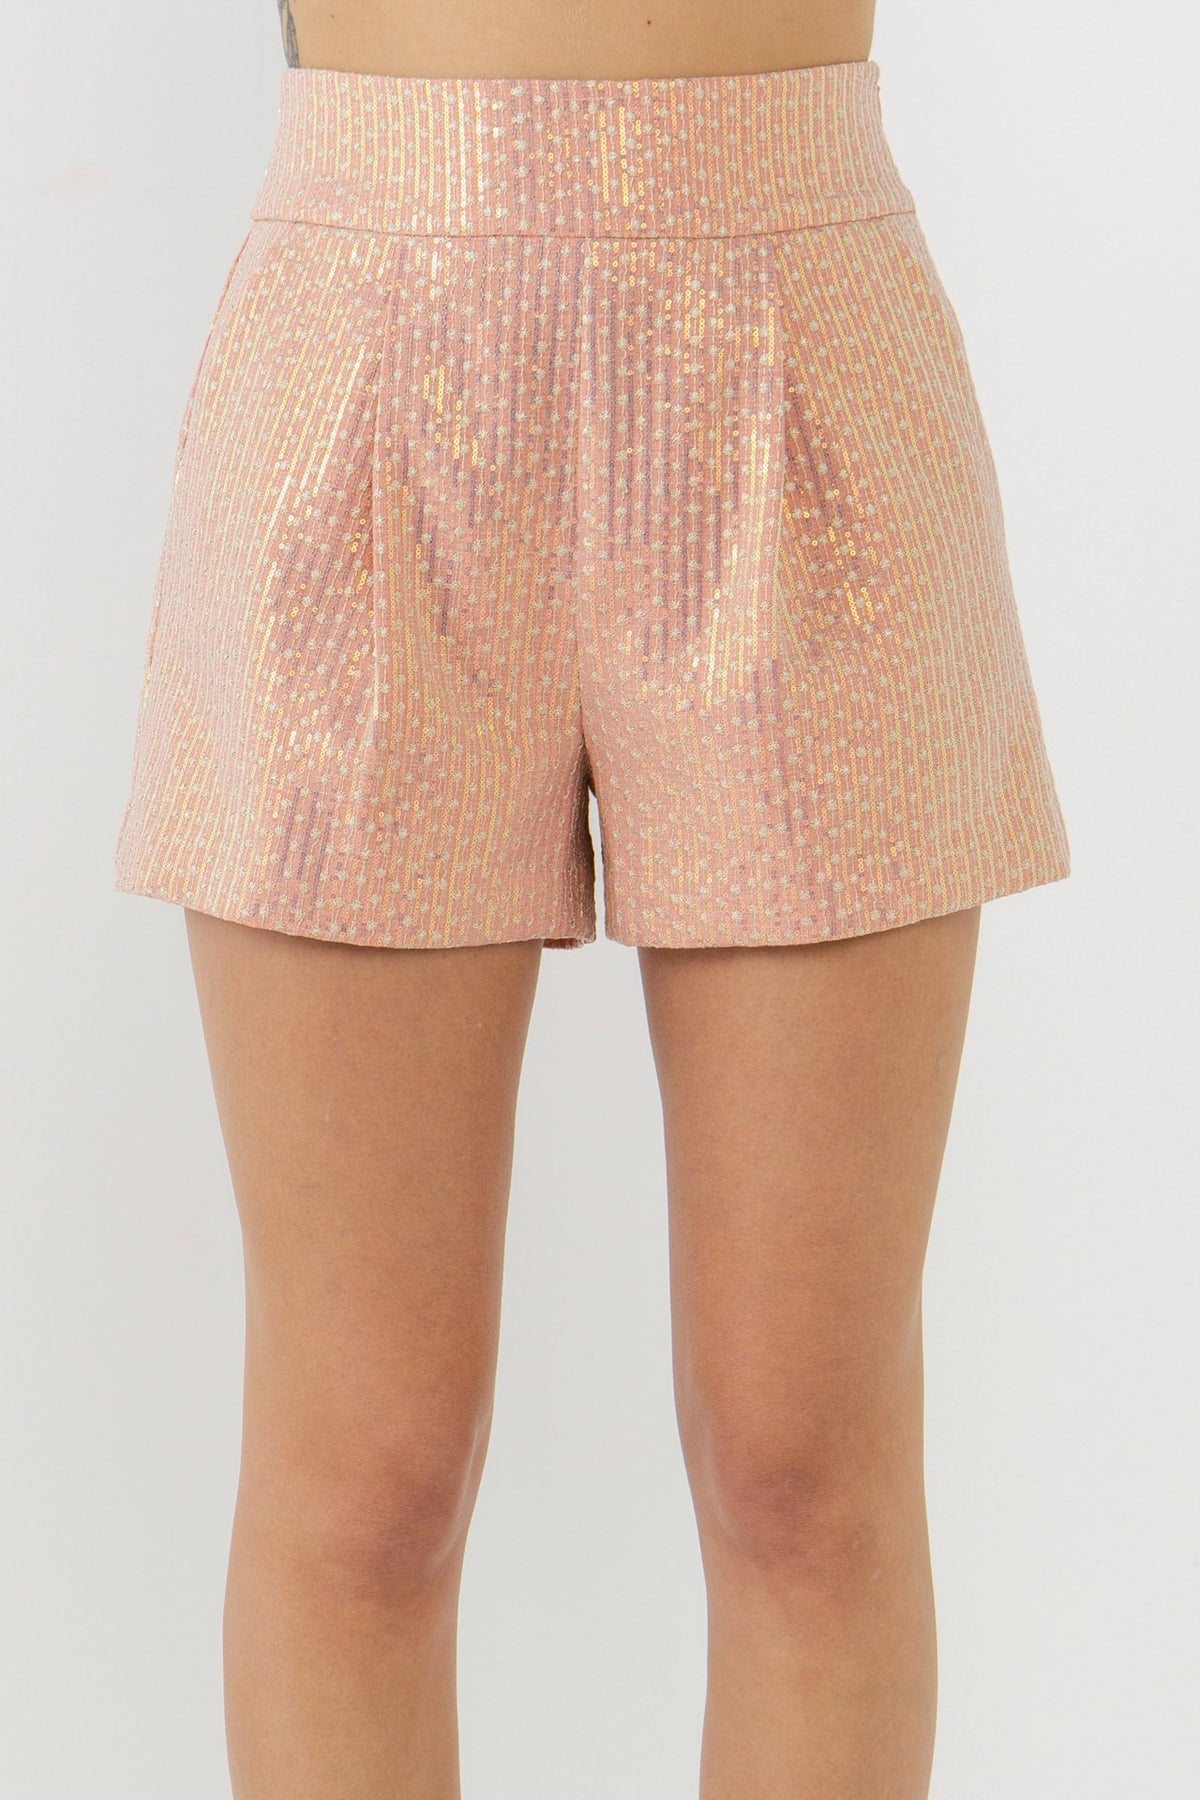 Sequin Embroidered Shorts